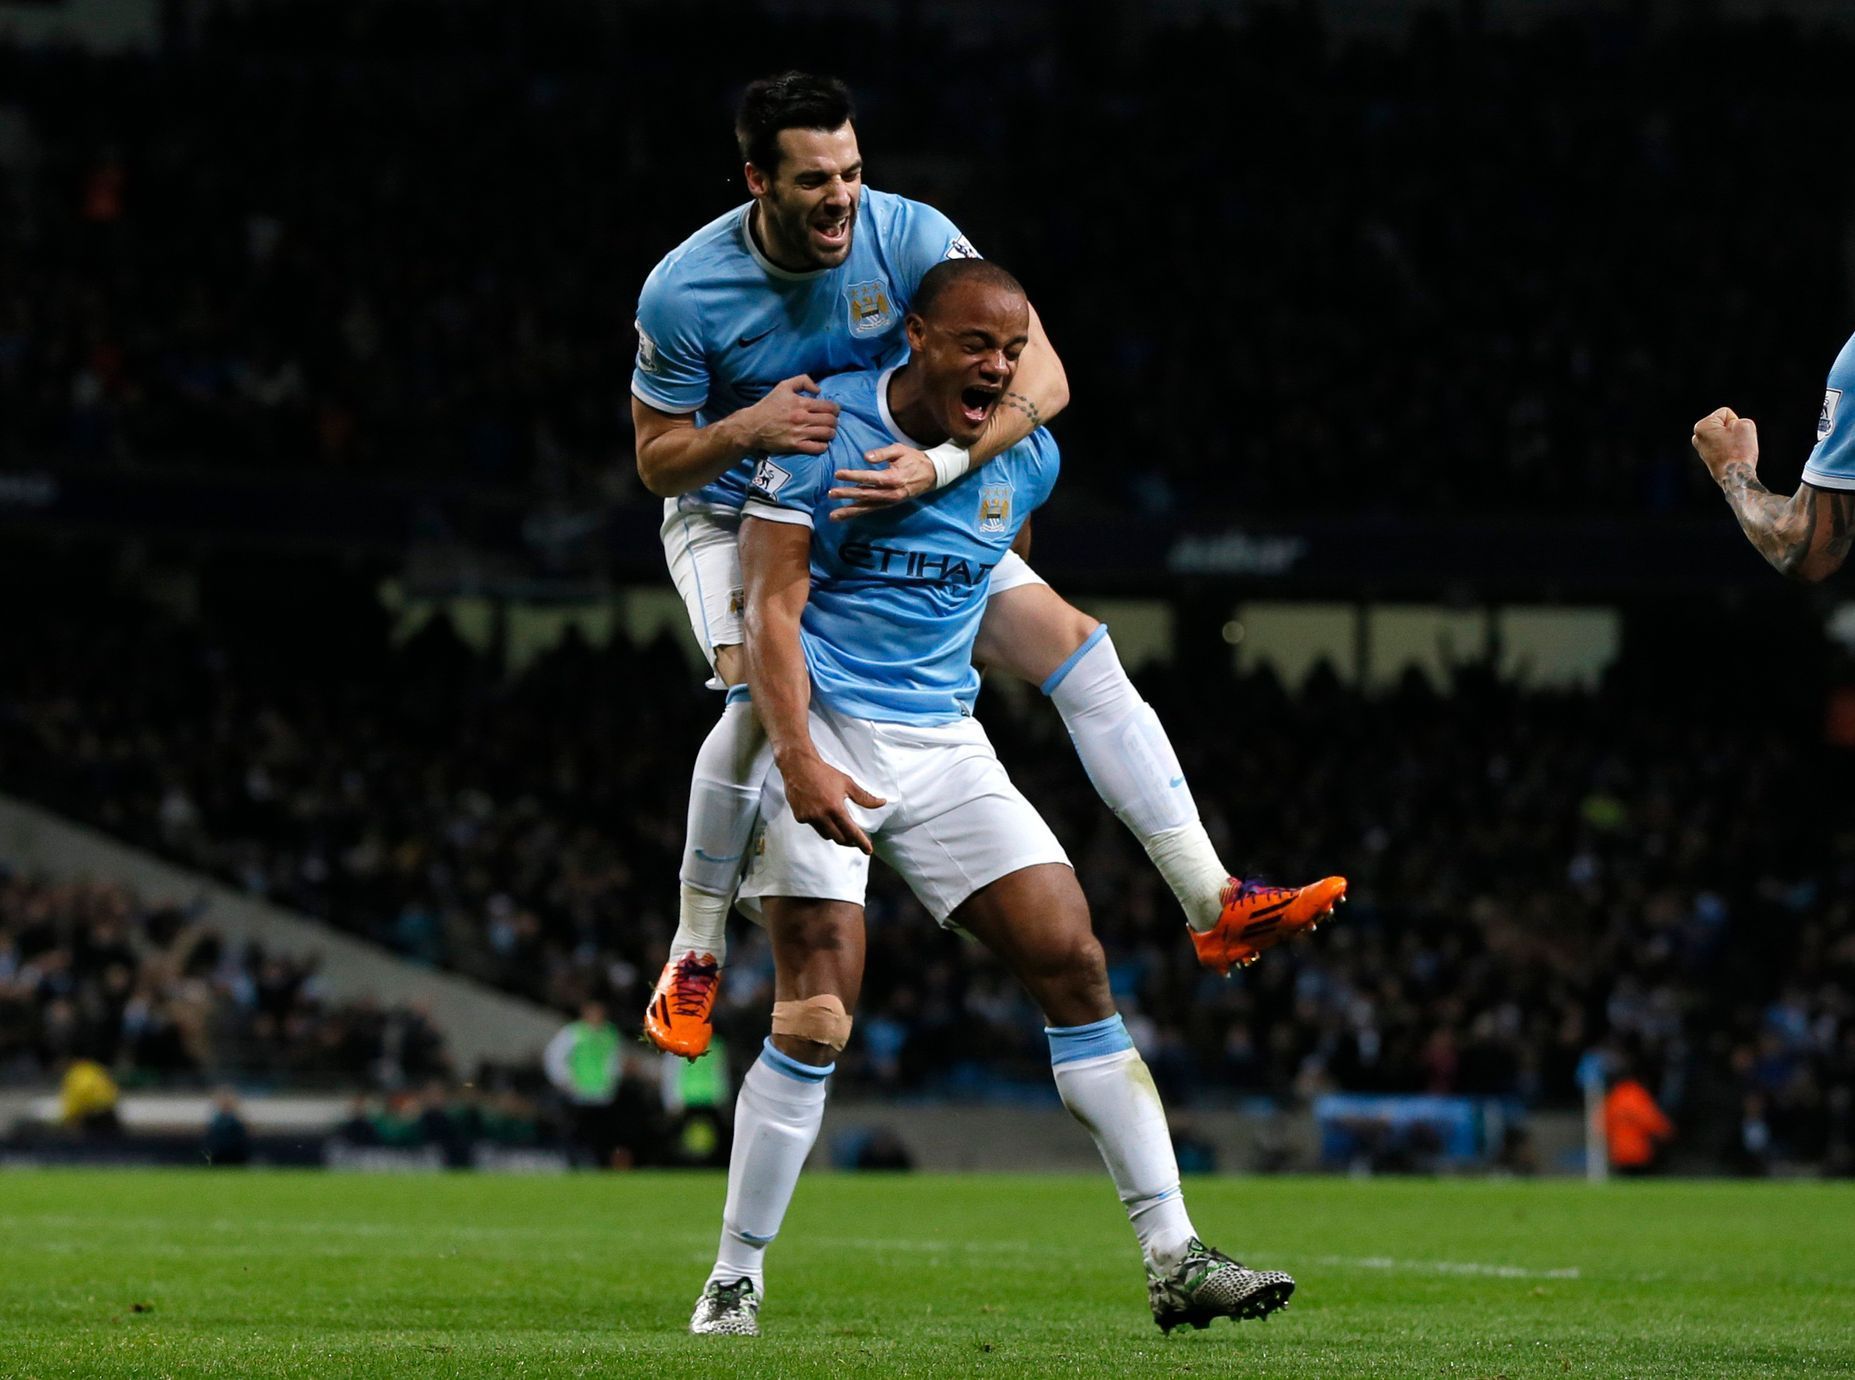 Manchester City's Kompany celebrates with teammate Negredo after scoring a goal against Liverpool during their English Premier League soccer match in Manchester